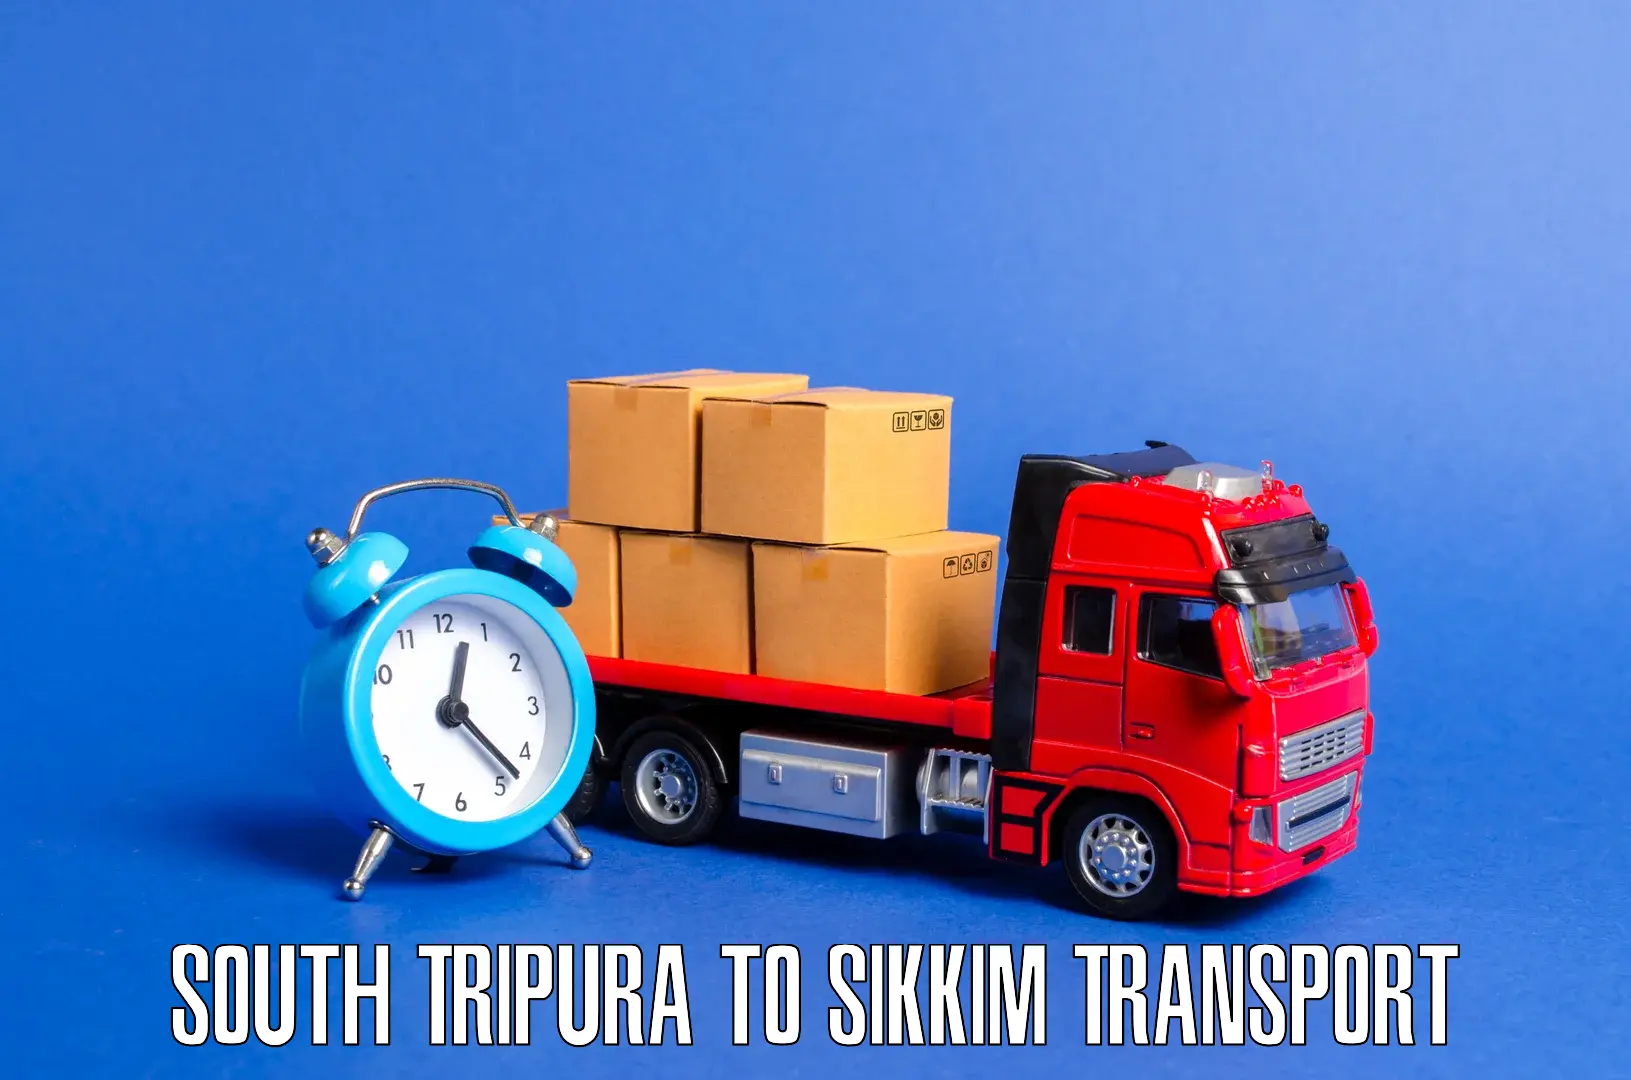 Delivery service South Tripura to Sikkim